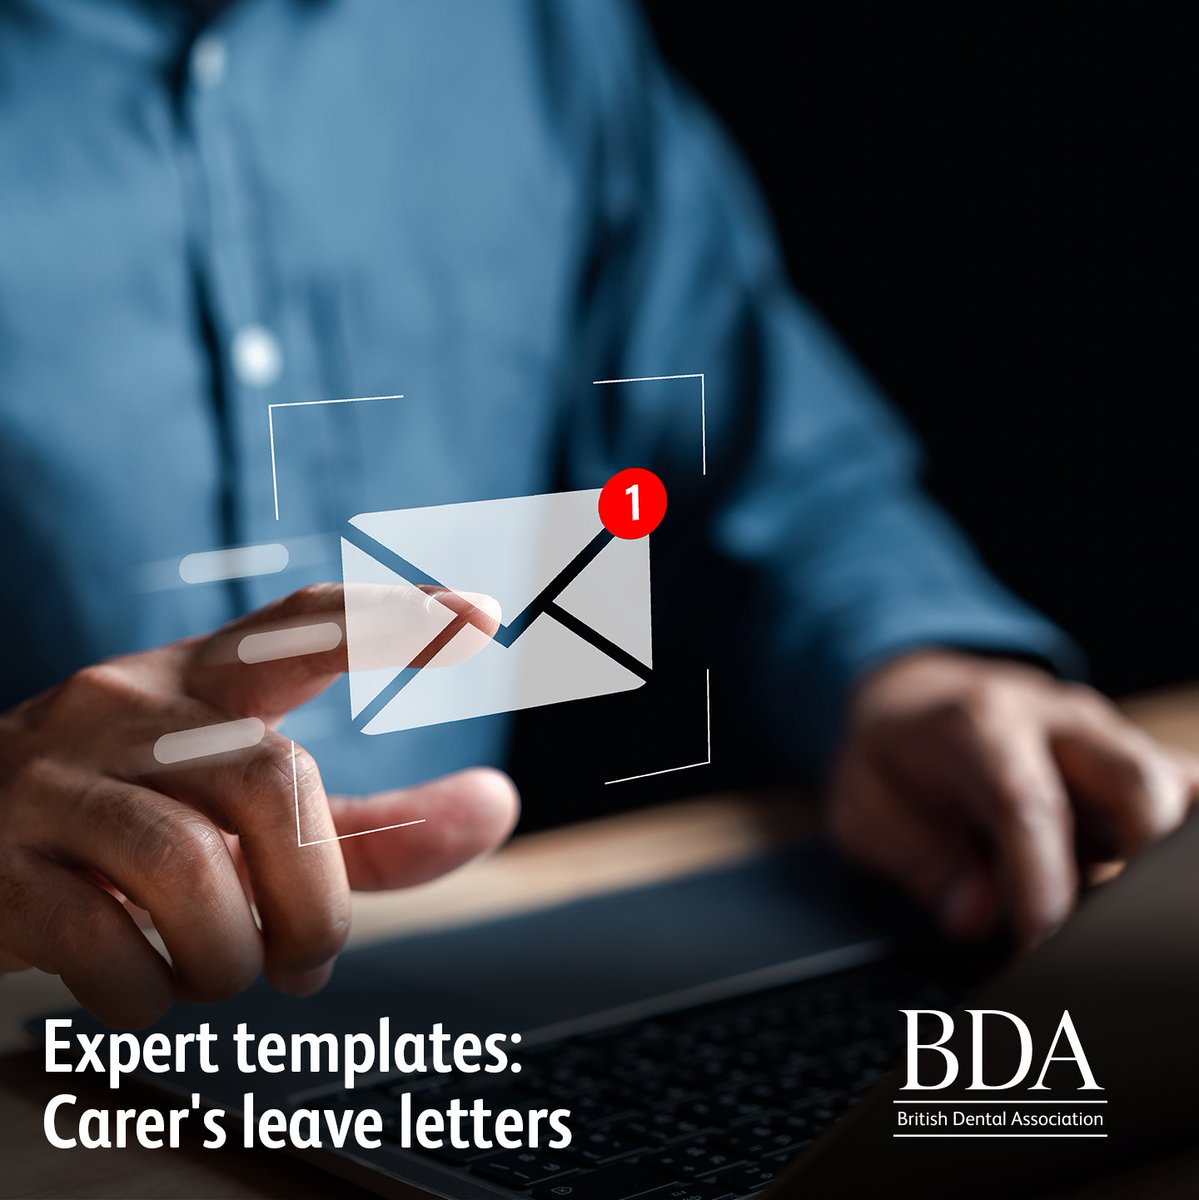 From 6 April 2024, employed staff in England, Wales and Scotland are entitled to take one week of unpaid leave per year if they are providing or arranging care for a dependant. We have updated our carers leave template letters alongside our new policy. bda.org/advice/templat…